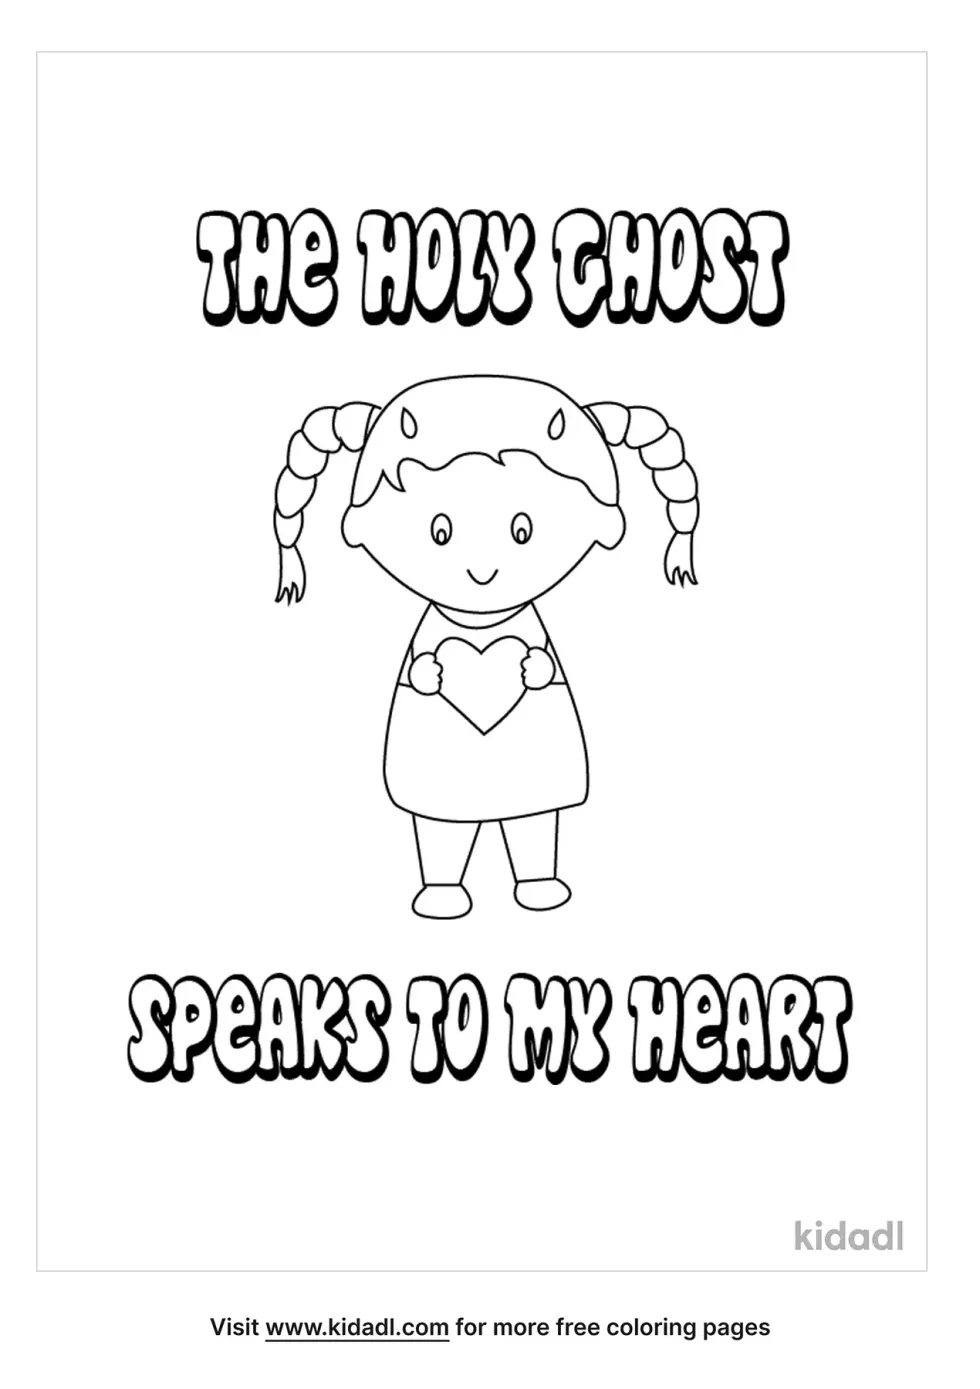 The Holy Ghost Speaks To My Heart Coloring Page